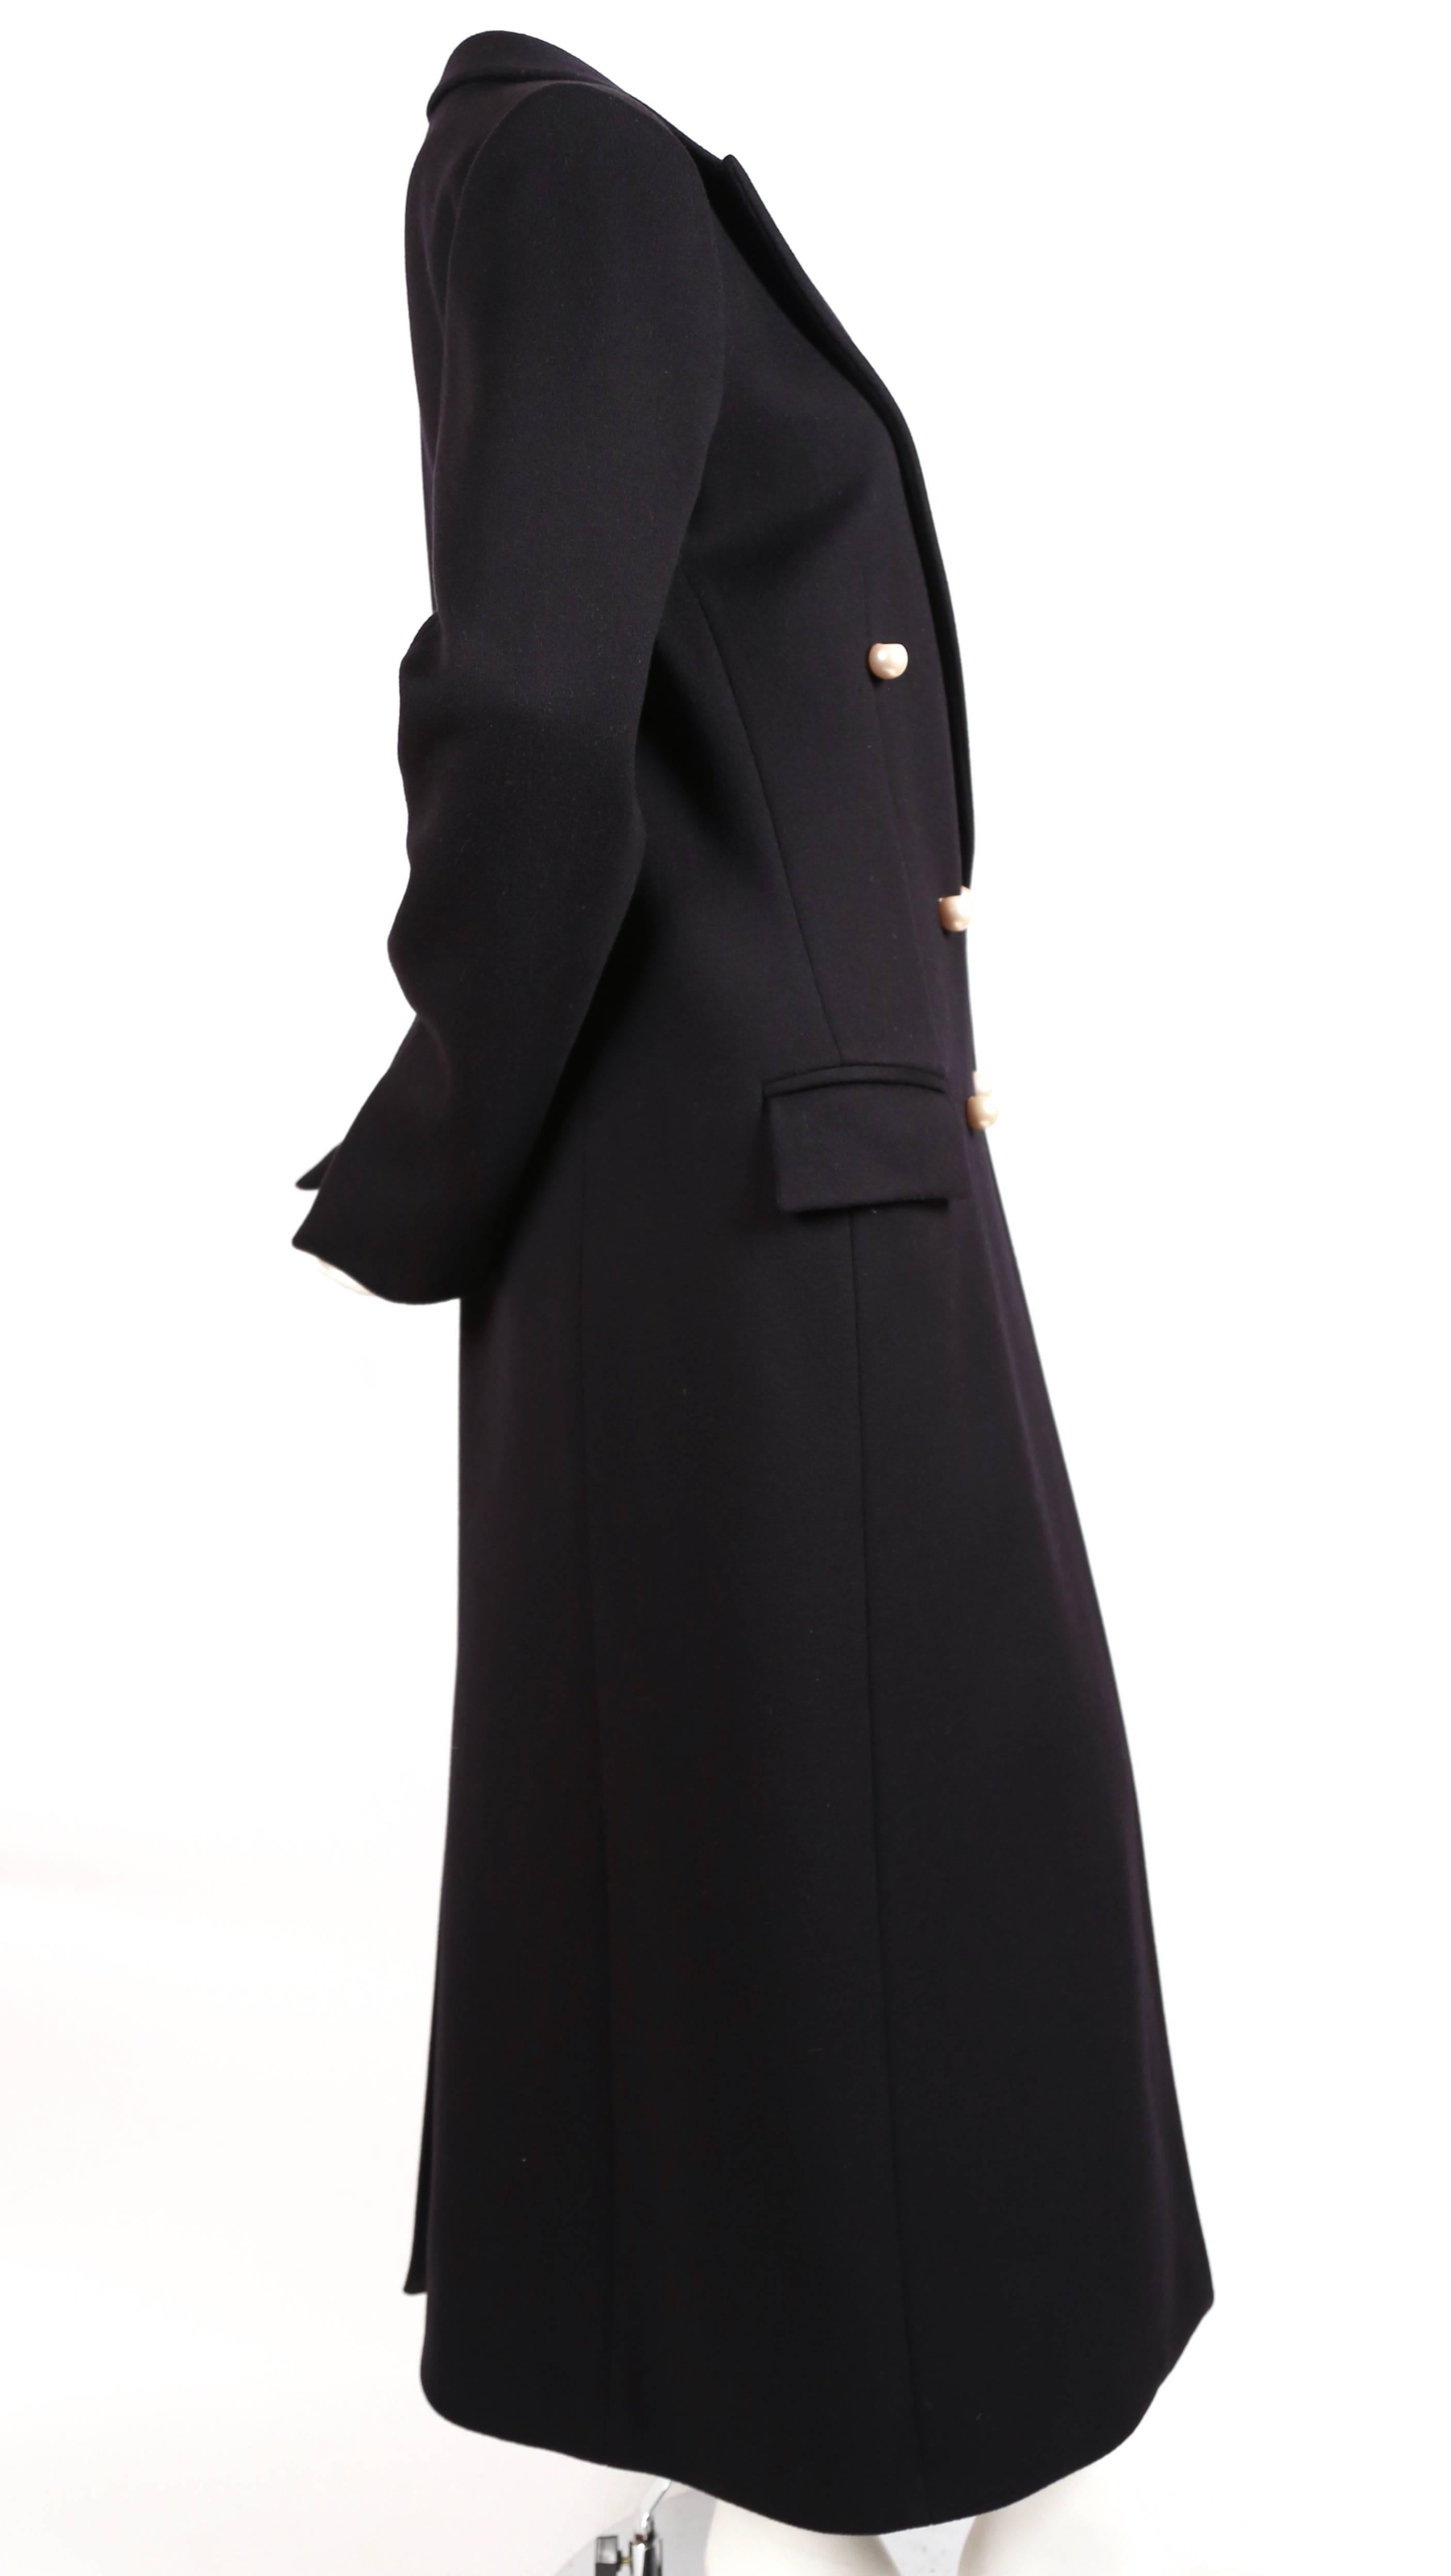 Darkest navy blue wool coat with oversized pearl buttons designed by Phoebe Philo for Celine exactly as seen for the pre-fall 2014 collection. French size 38. Approximate measurements: shoulders 17